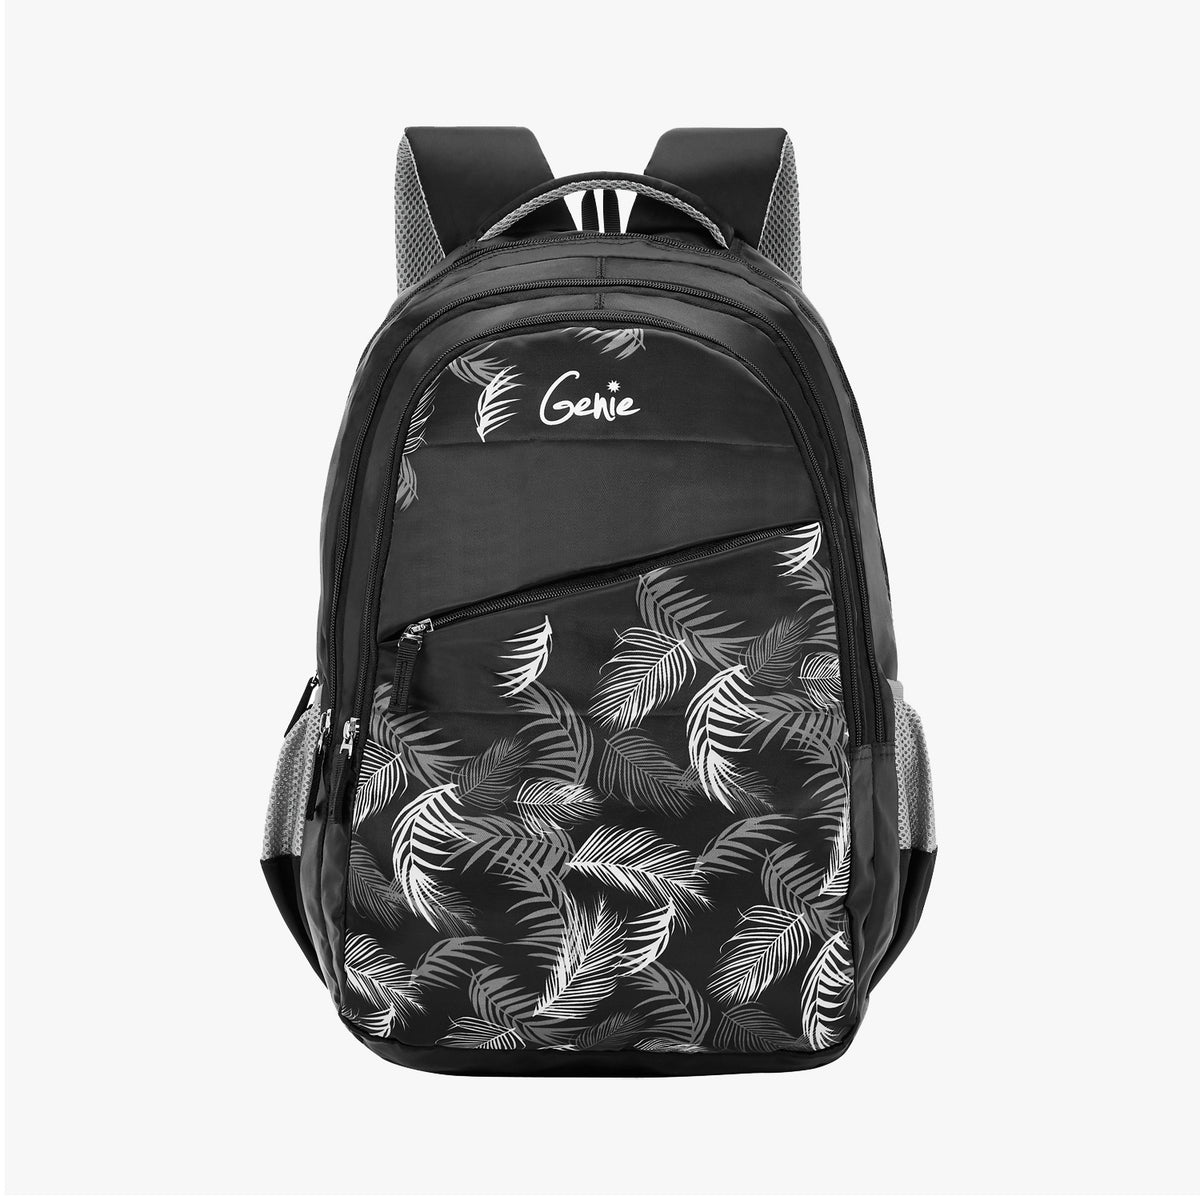 Genie Lush 36L Black School Backpack With Easy Access Pockets